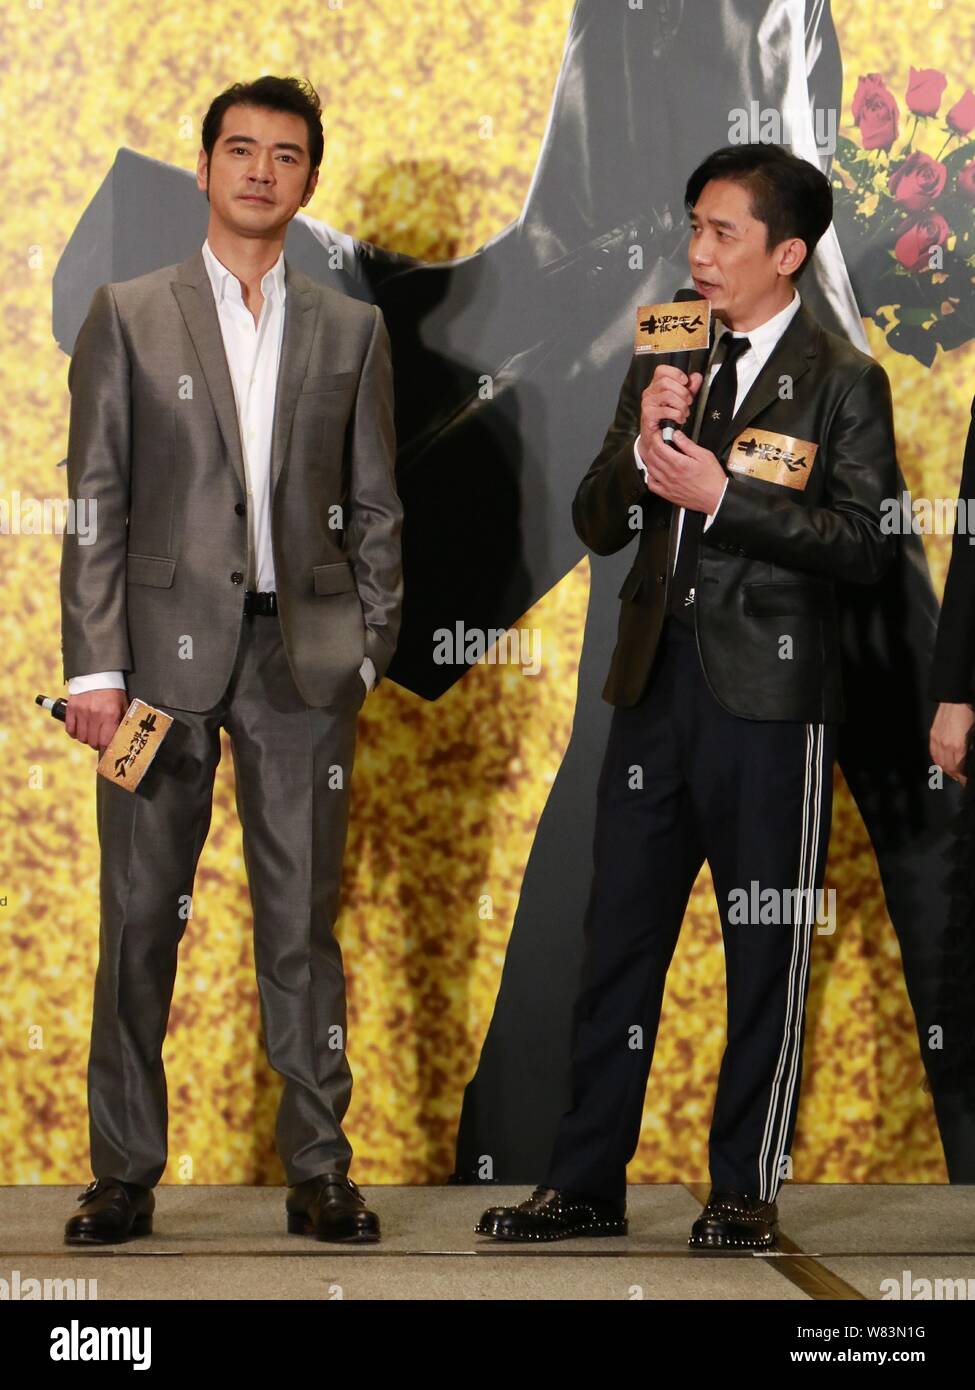 Hong Kong actor Tony Leung Chiu-wai, right, and Taiwanese-Japanese actor Takeshi Kaneshiro attend a charity premiere event for their new movie 'See Yo Stock Photo